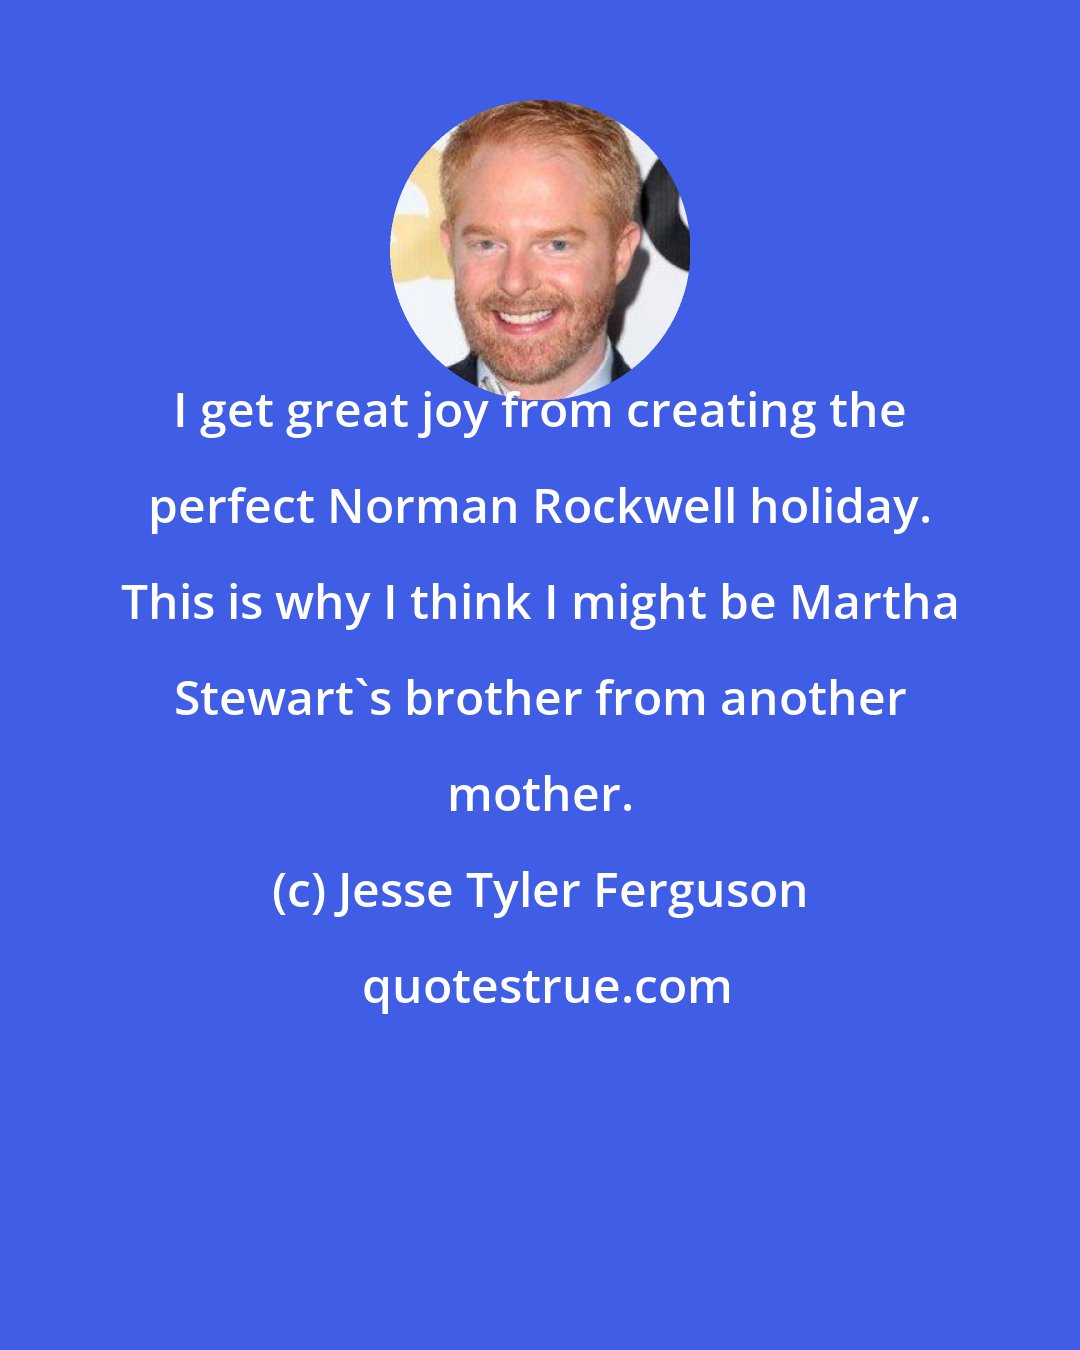 Jesse Tyler Ferguson: I get great joy from creating the perfect Norman Rockwell holiday. This is why I think I might be Martha Stewart's brother from another mother.